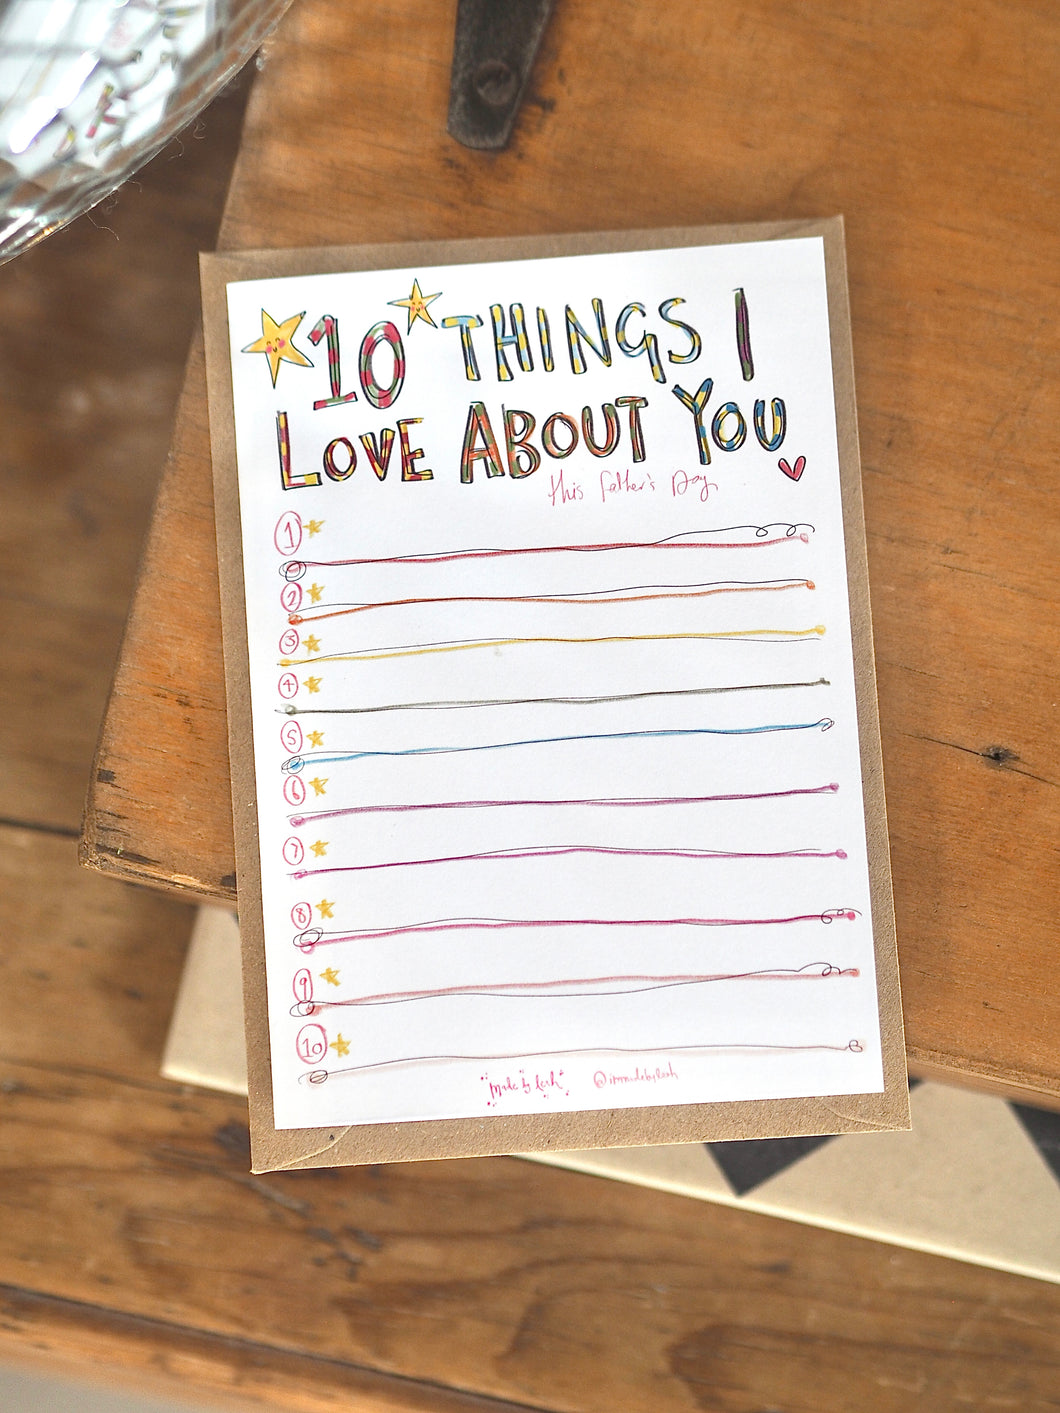 ‘10 Things I Love About You’ Write Your Own Card